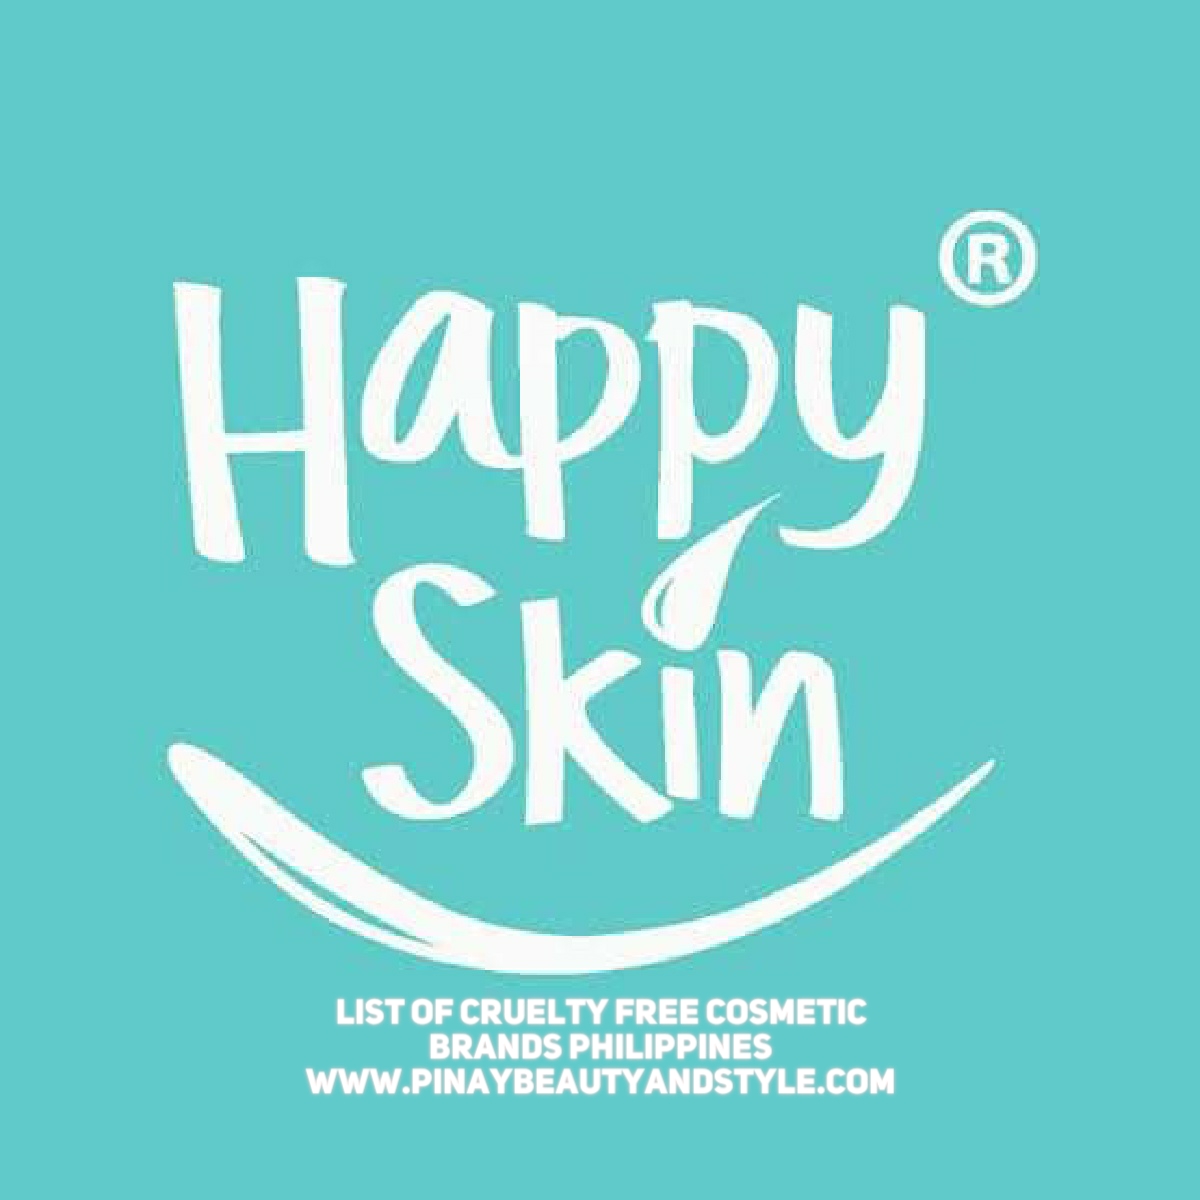 25 Cruelty Free Cosmetic Brands Philippines 21 Crueltyfreeph Crueltyfreebeauty Crueltyfreemakeup Crueltyfreebrands Pinay Beauty And Style